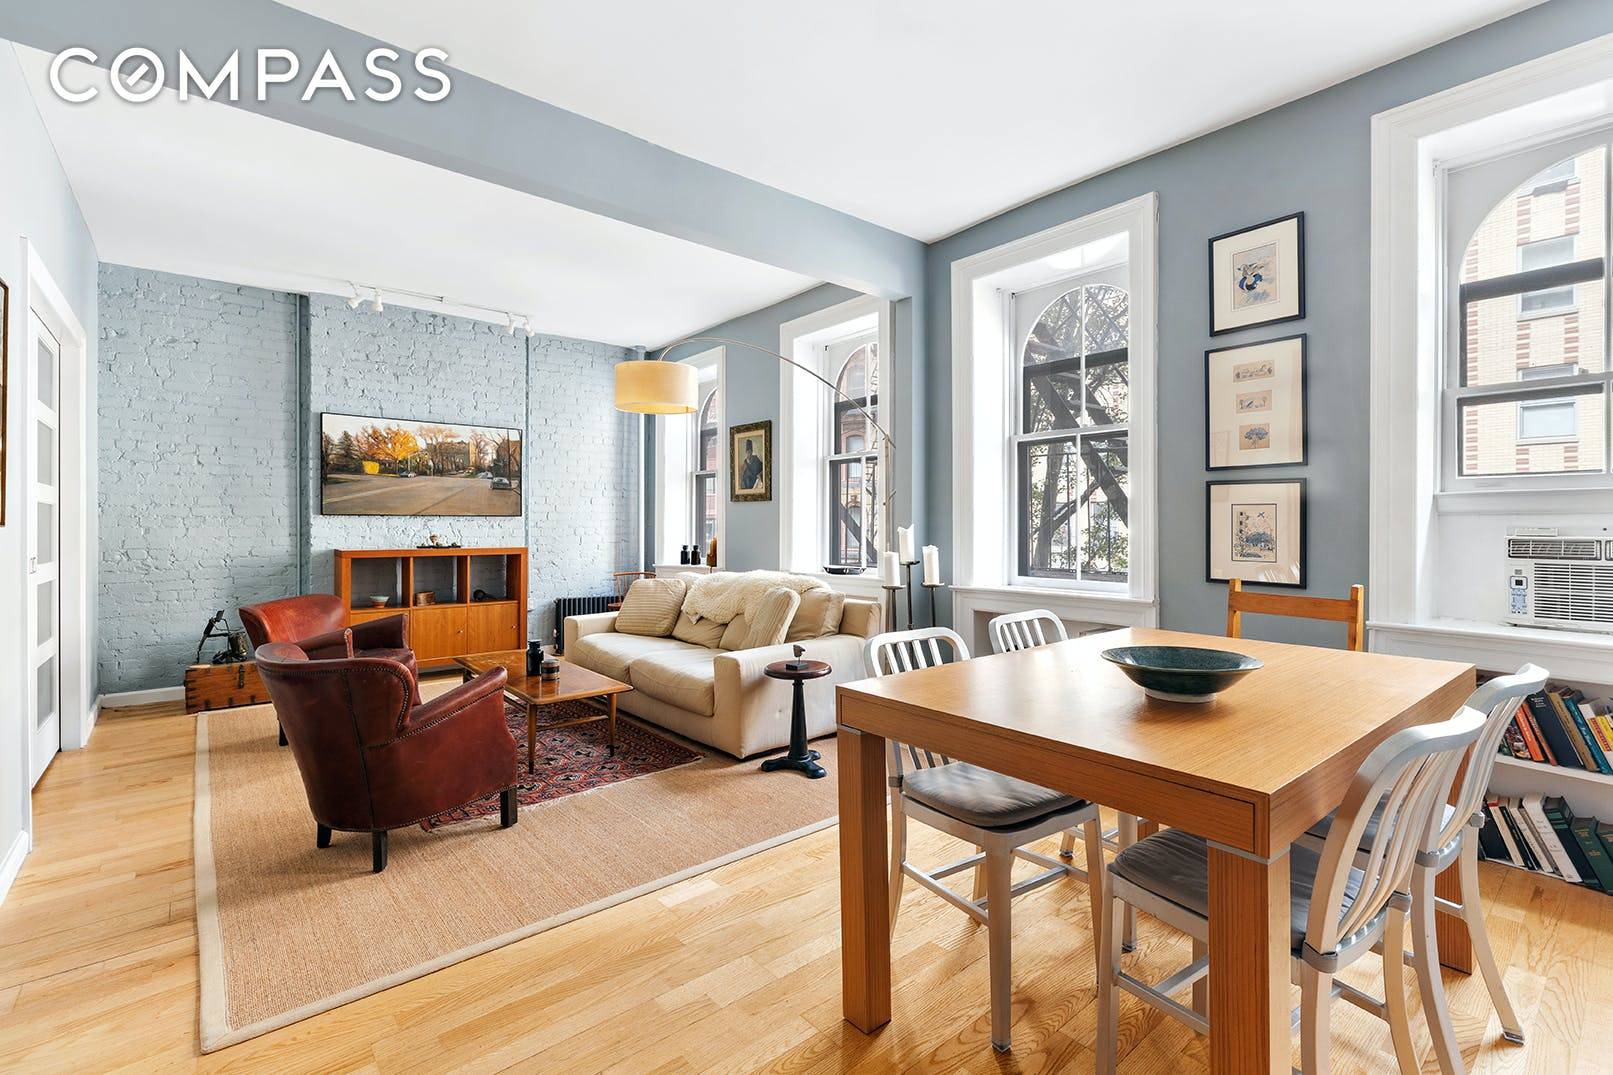 Here is your opportunity to own this fabulous mint condition East Village charmer.